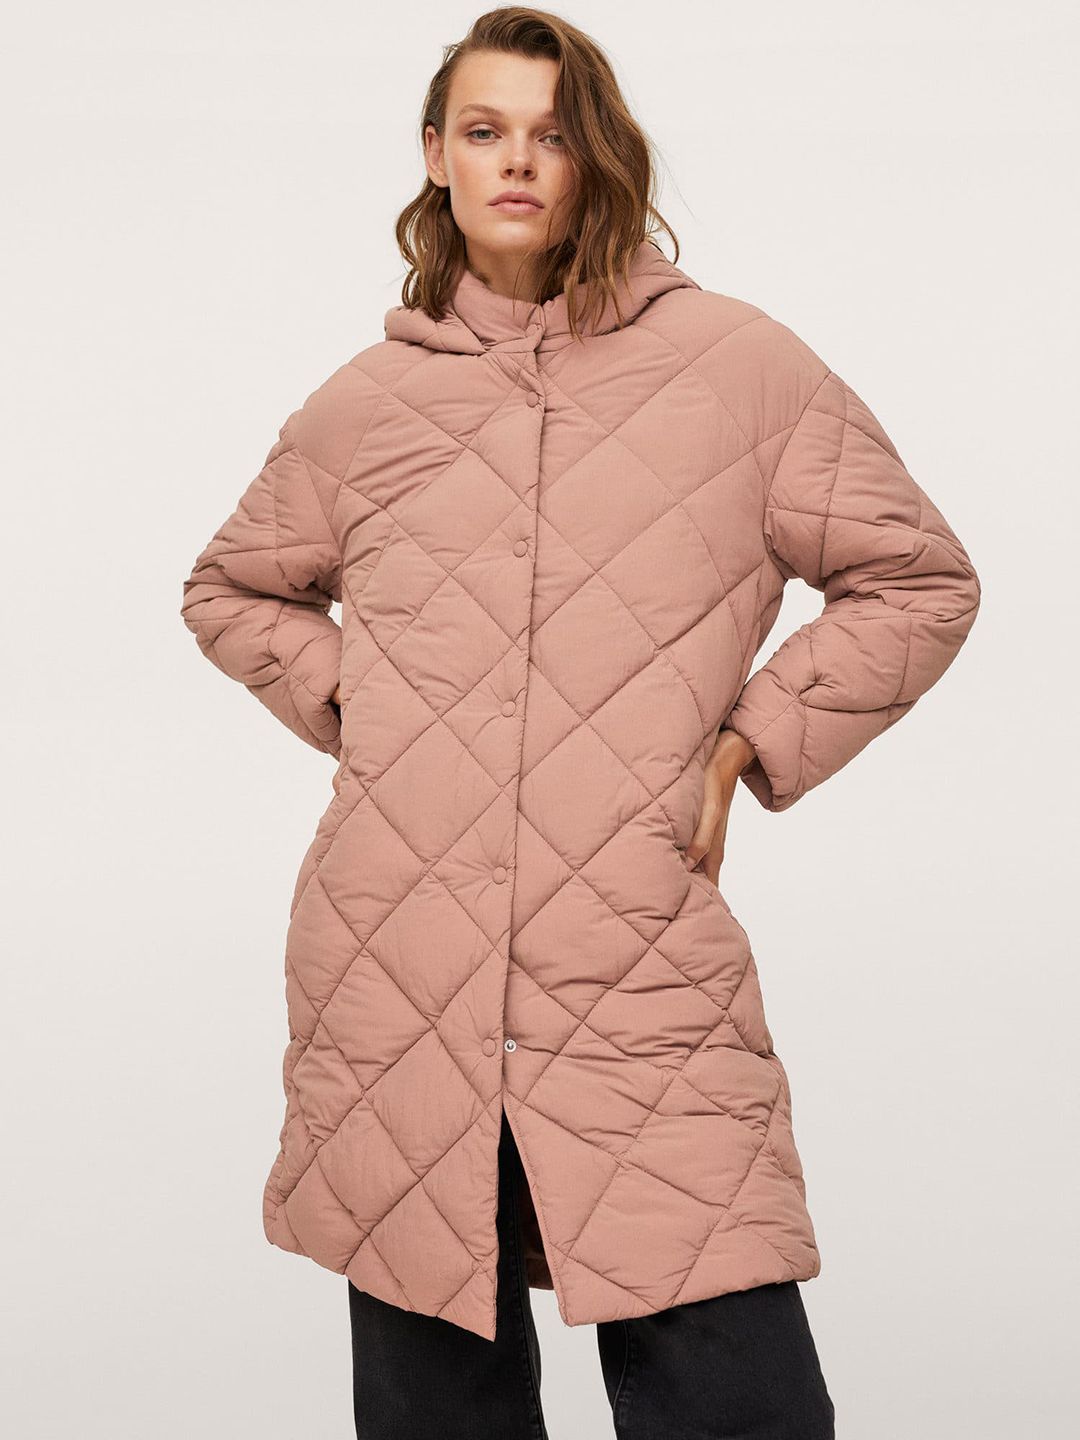 MANGO Women Dusty Pink Solid Longline Quilted Jacket Price in India